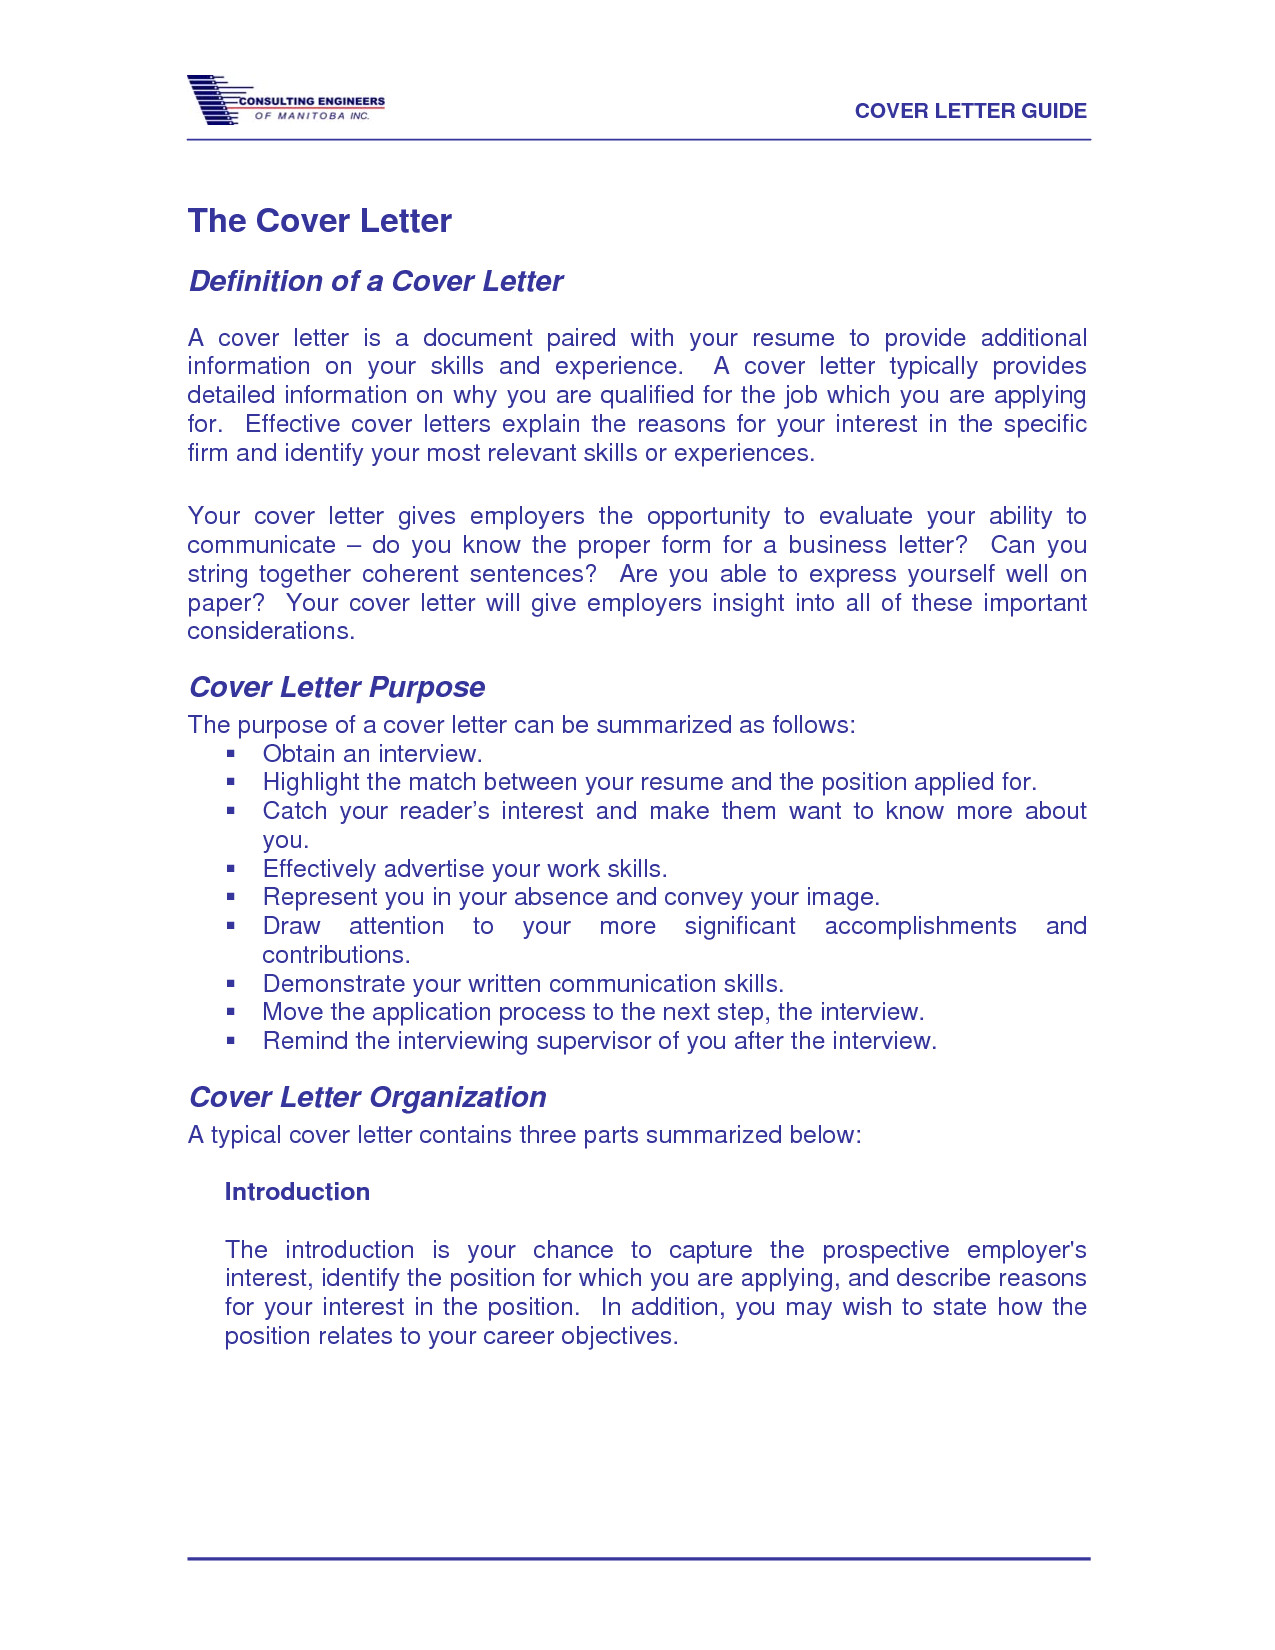 cover letter definition